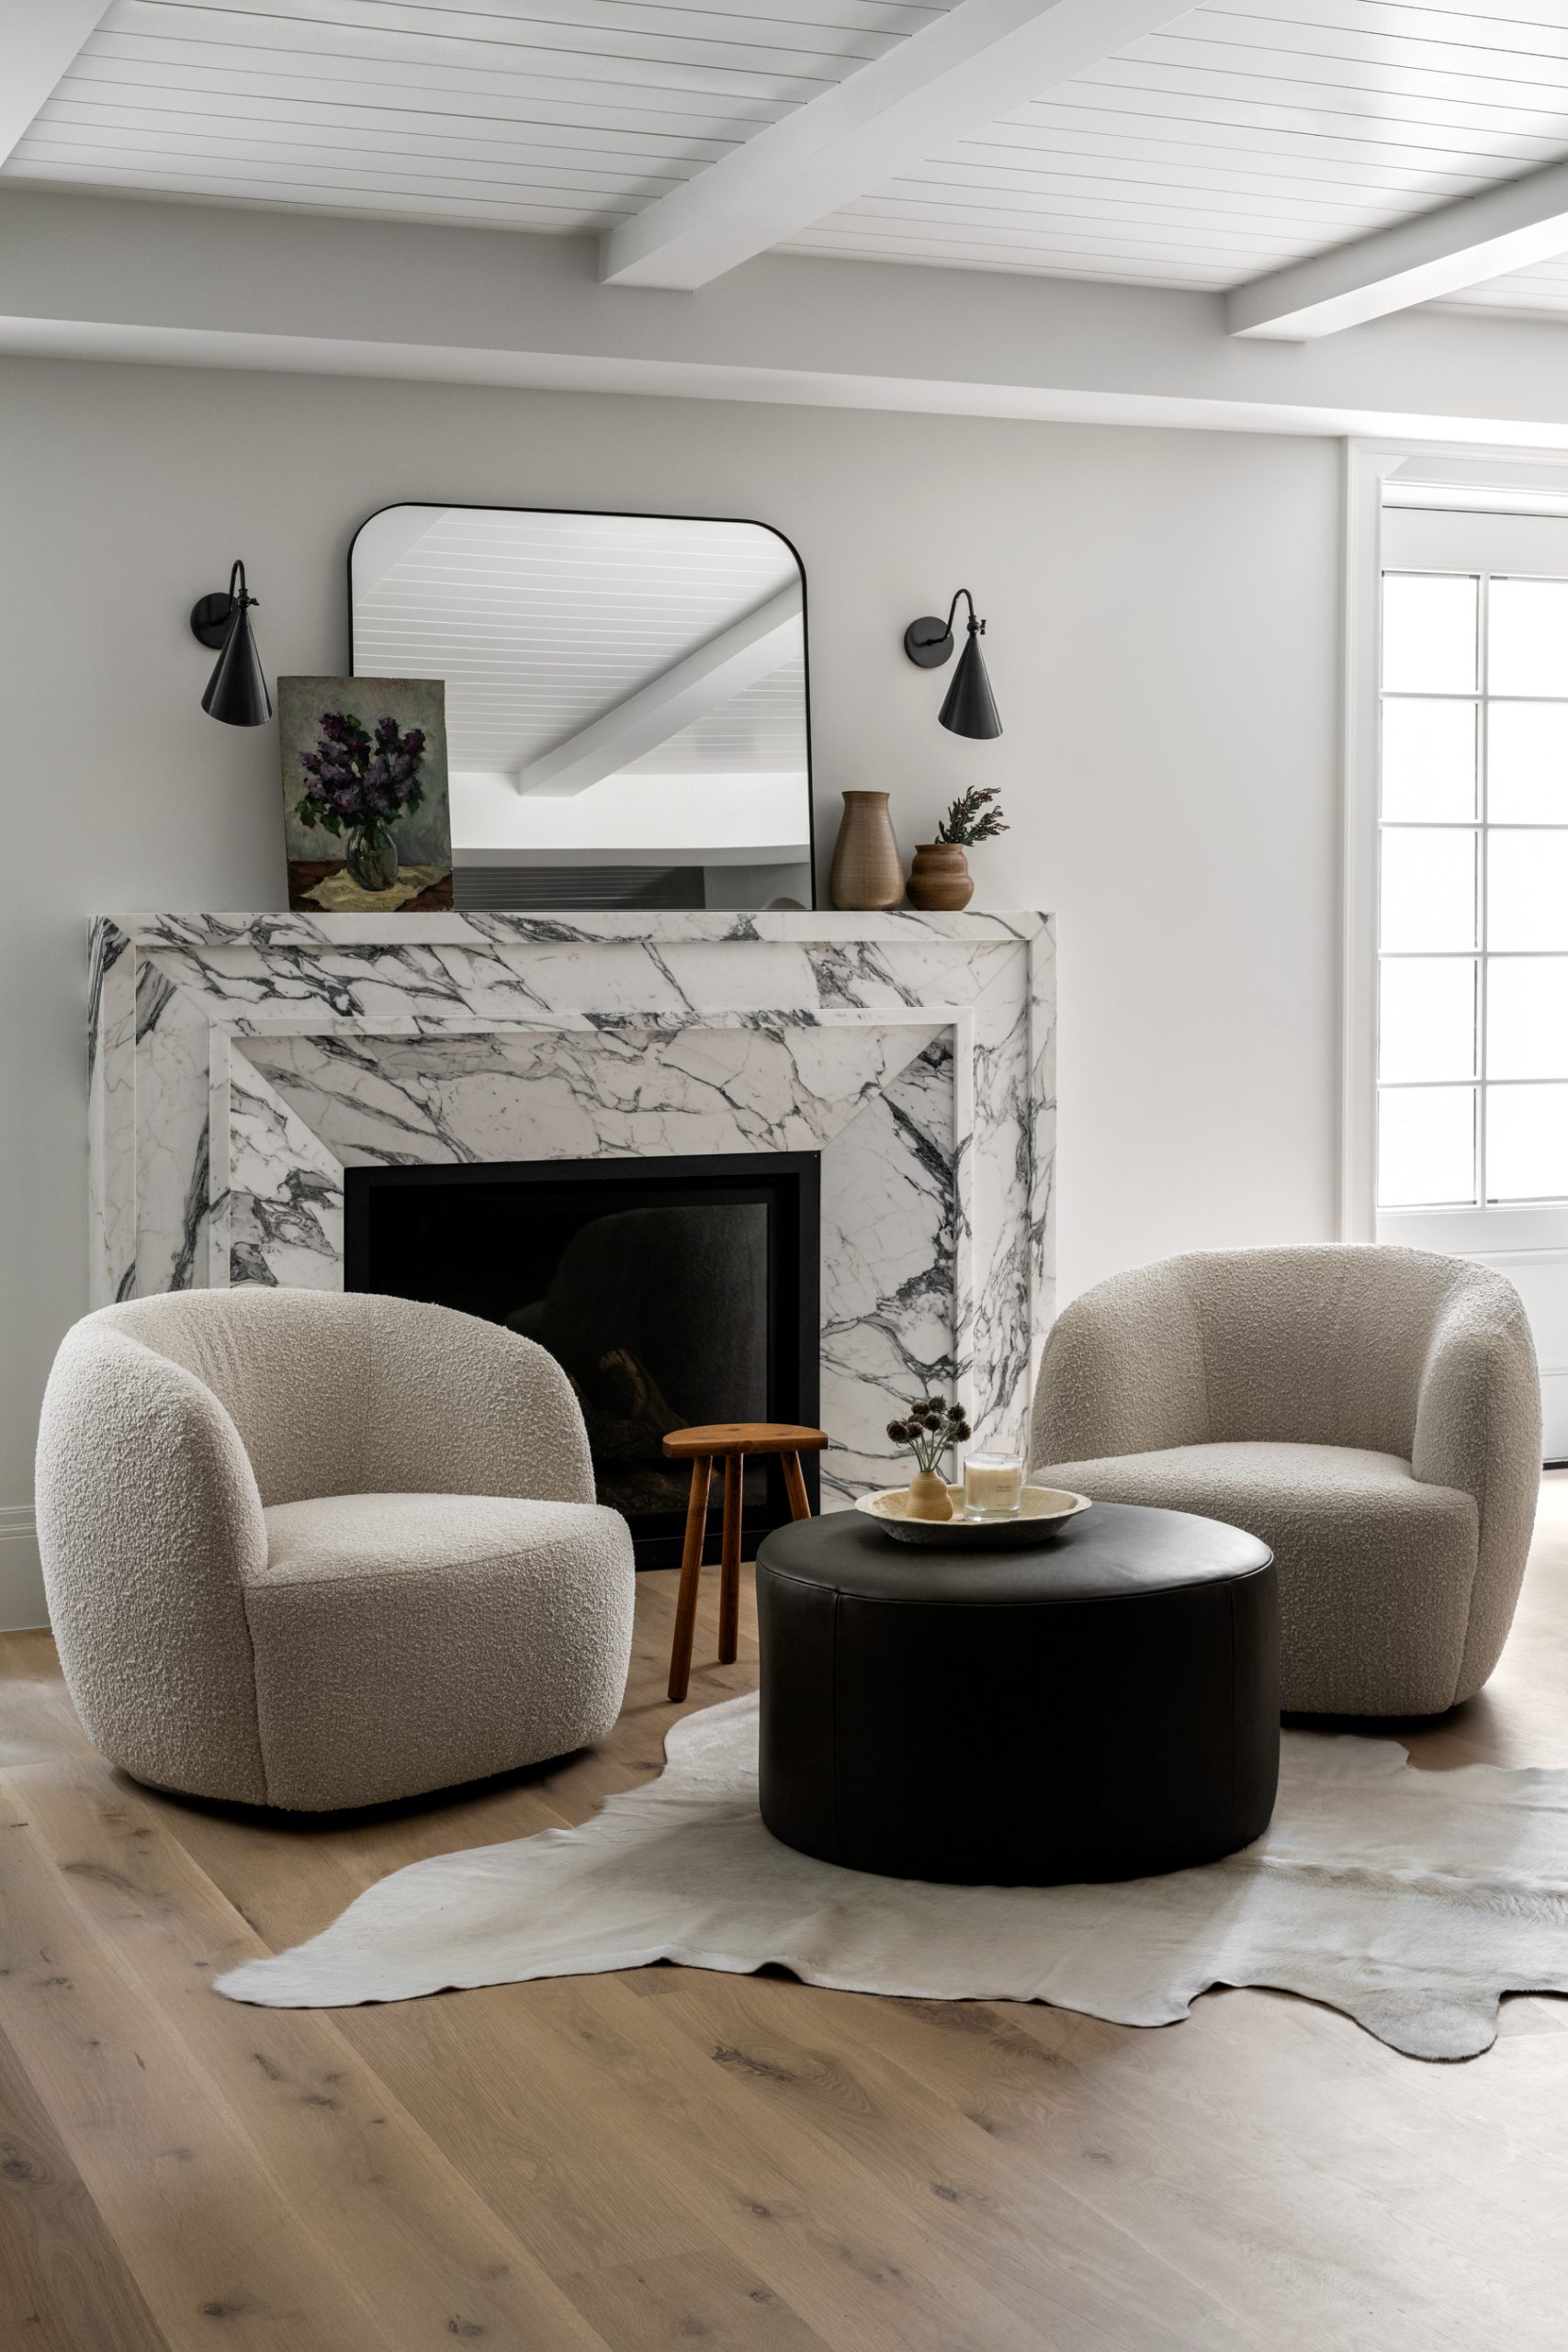 Marble fireplace with two lounge chairs in front